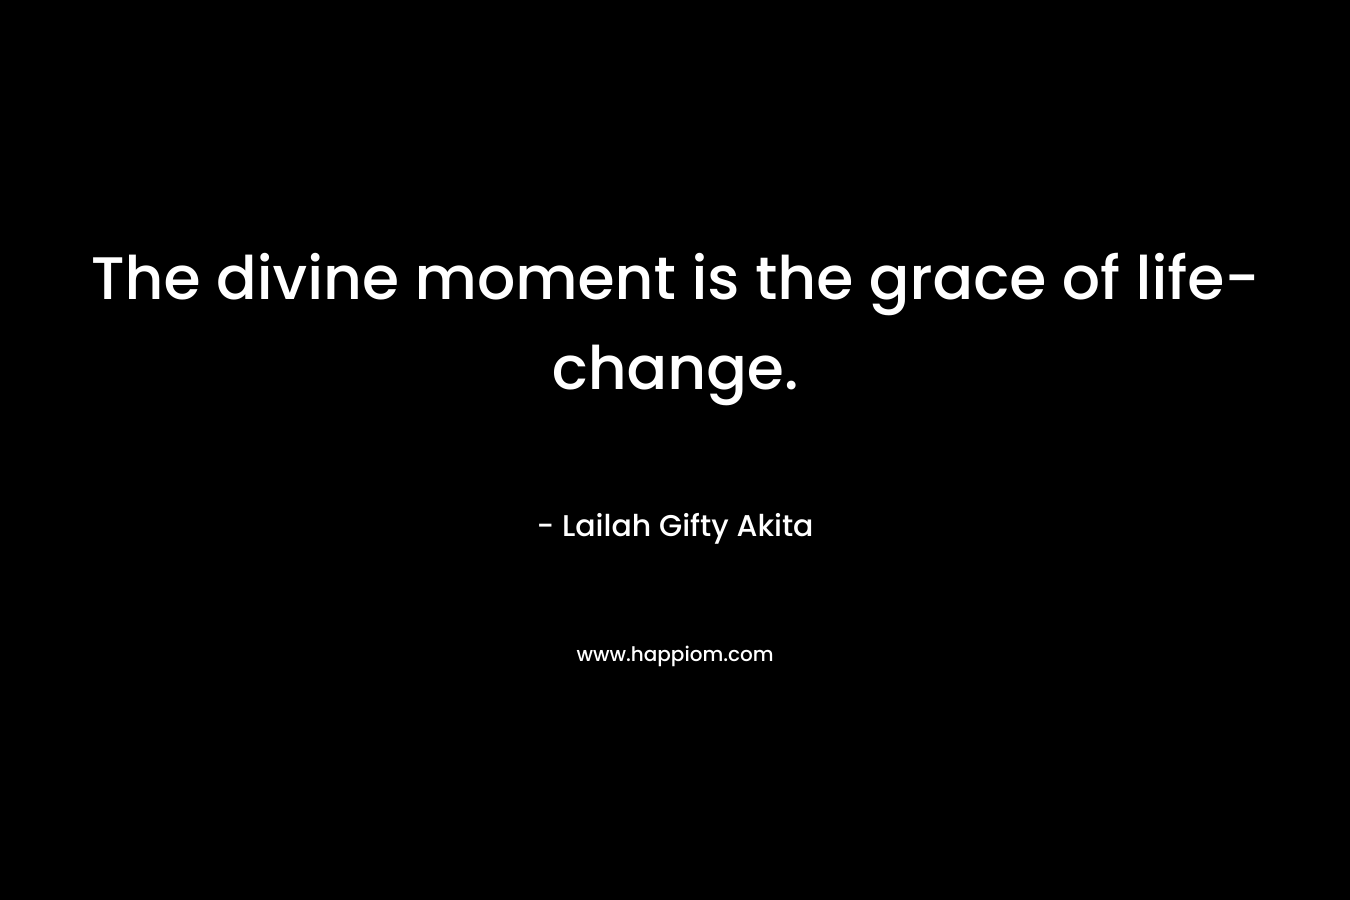 The divine moment is the grace of life-change. – Lailah Gifty Akita